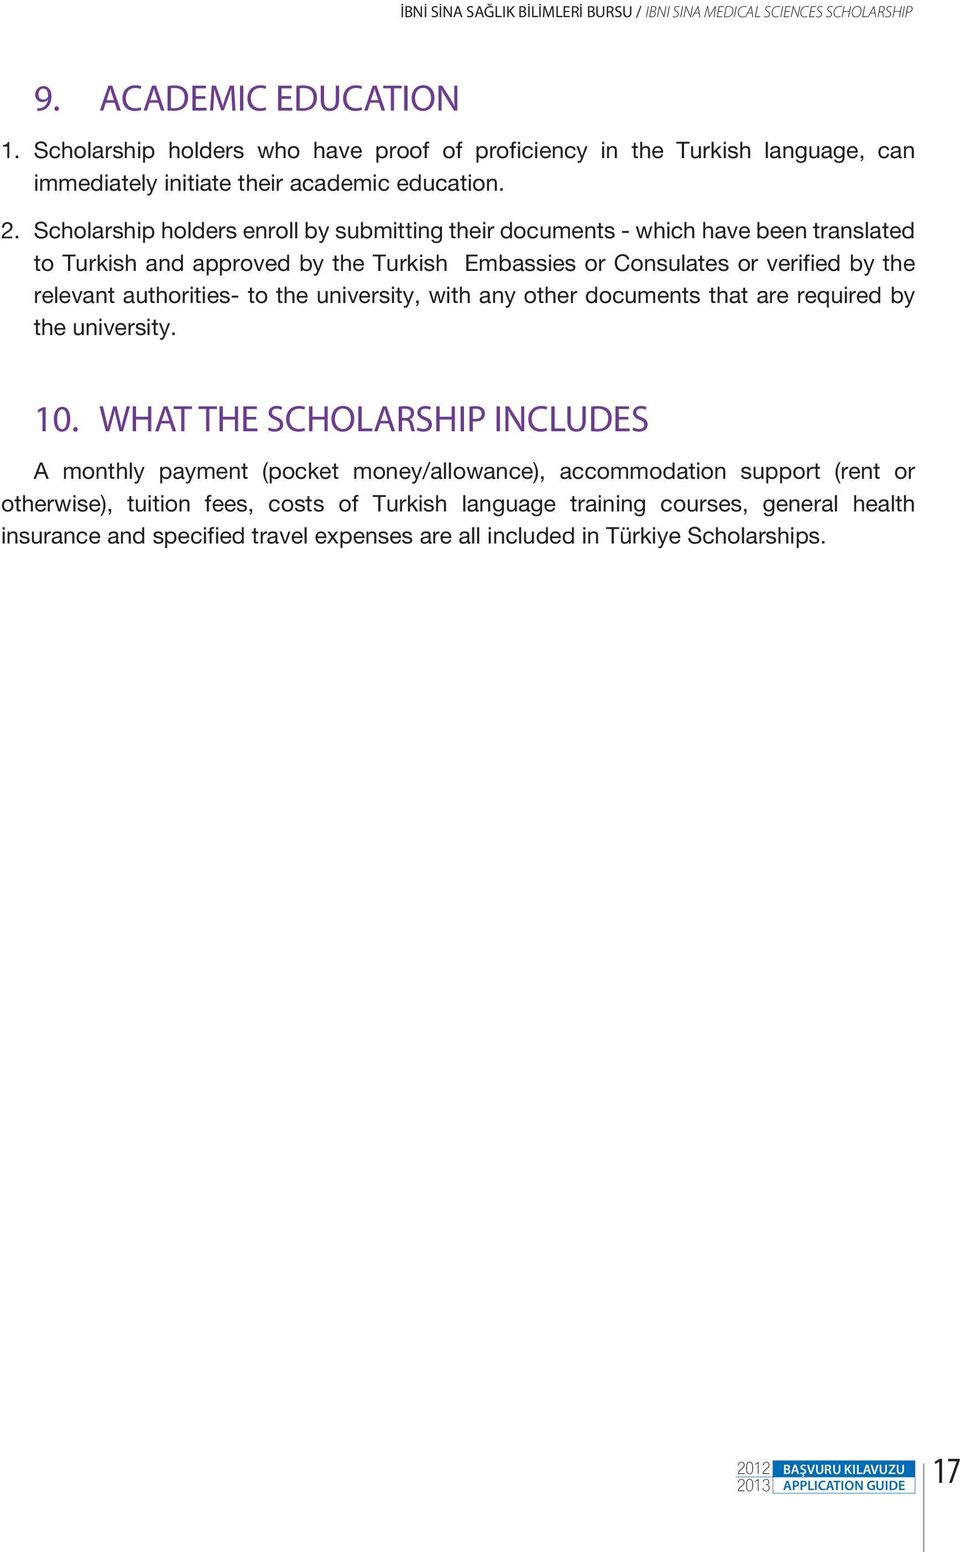 Scholarship holders enroll by submitting their documents - which have been translated to Turkish and approved by the Turkish Embassies or Consulates or verified by the relevant authorities- to